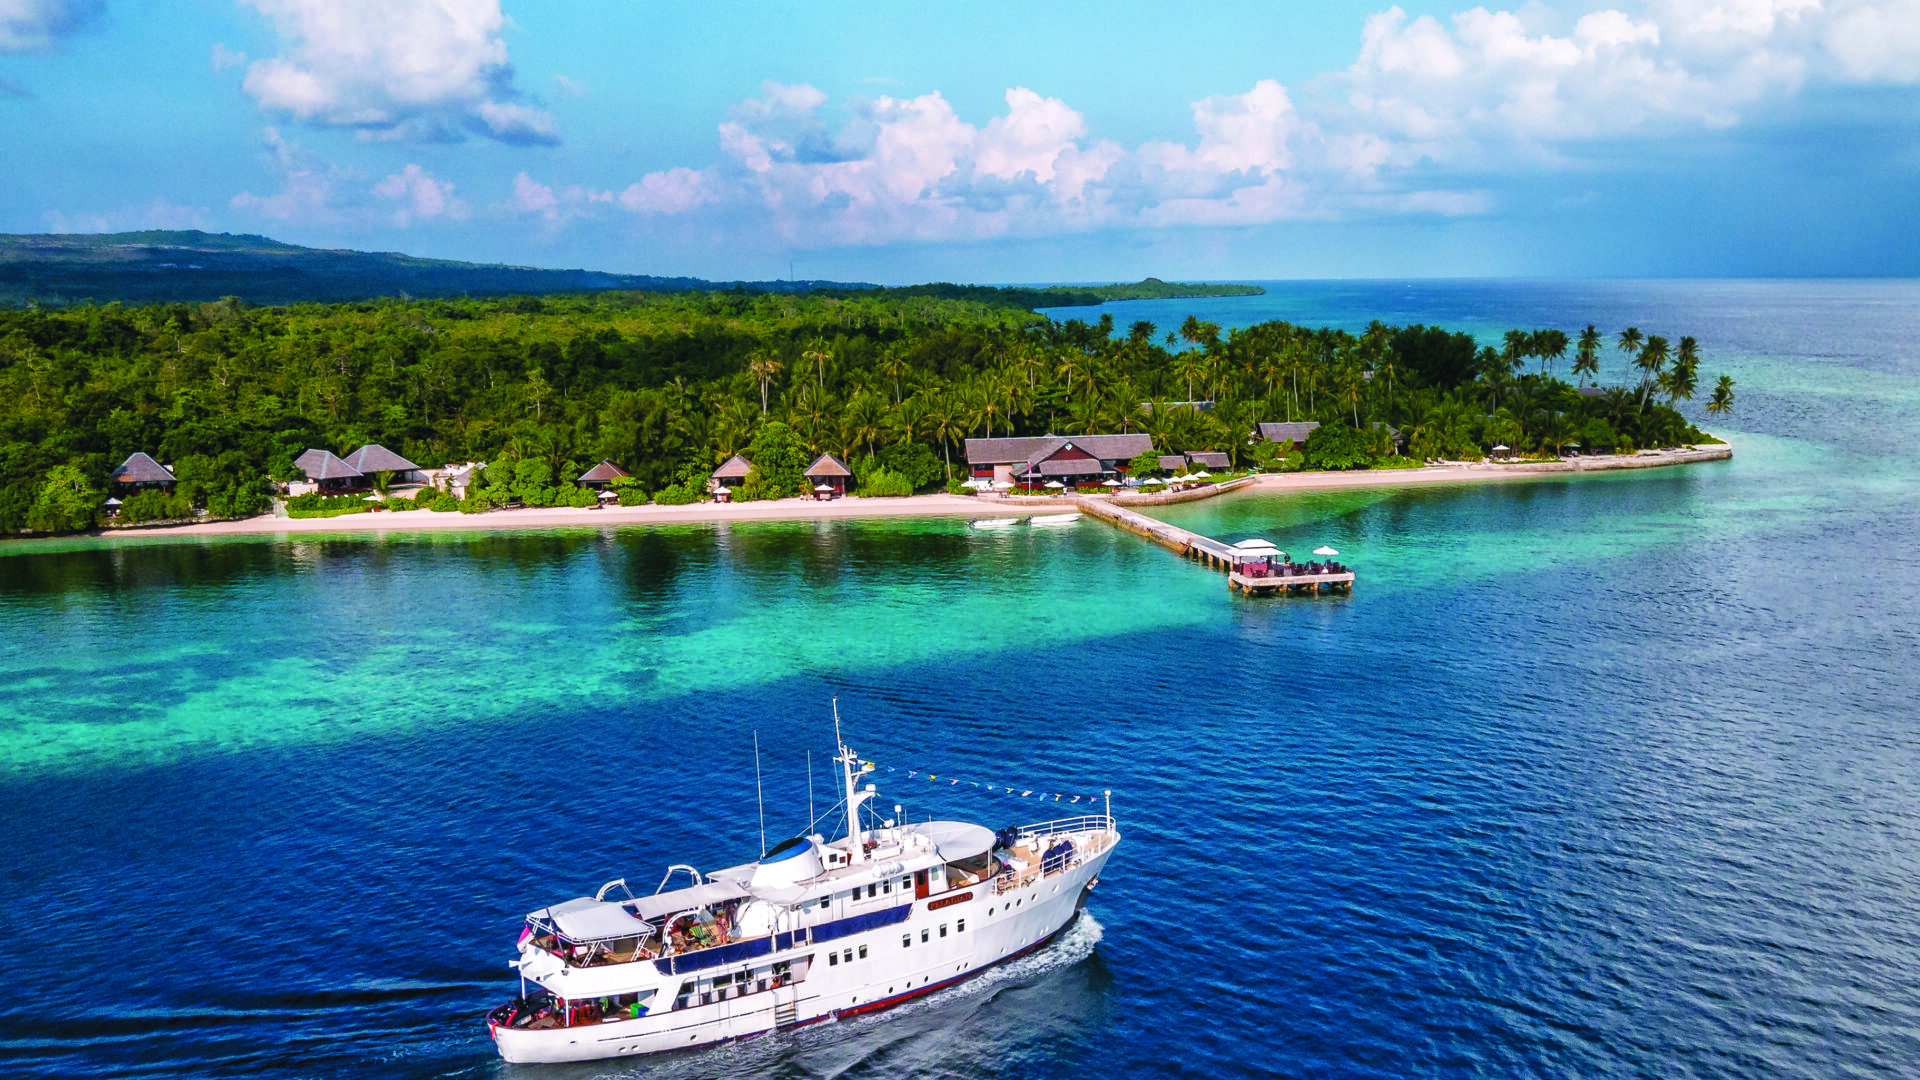 wakatobi resort and house reef; pelagian on the way out for a week-long cruise to buton